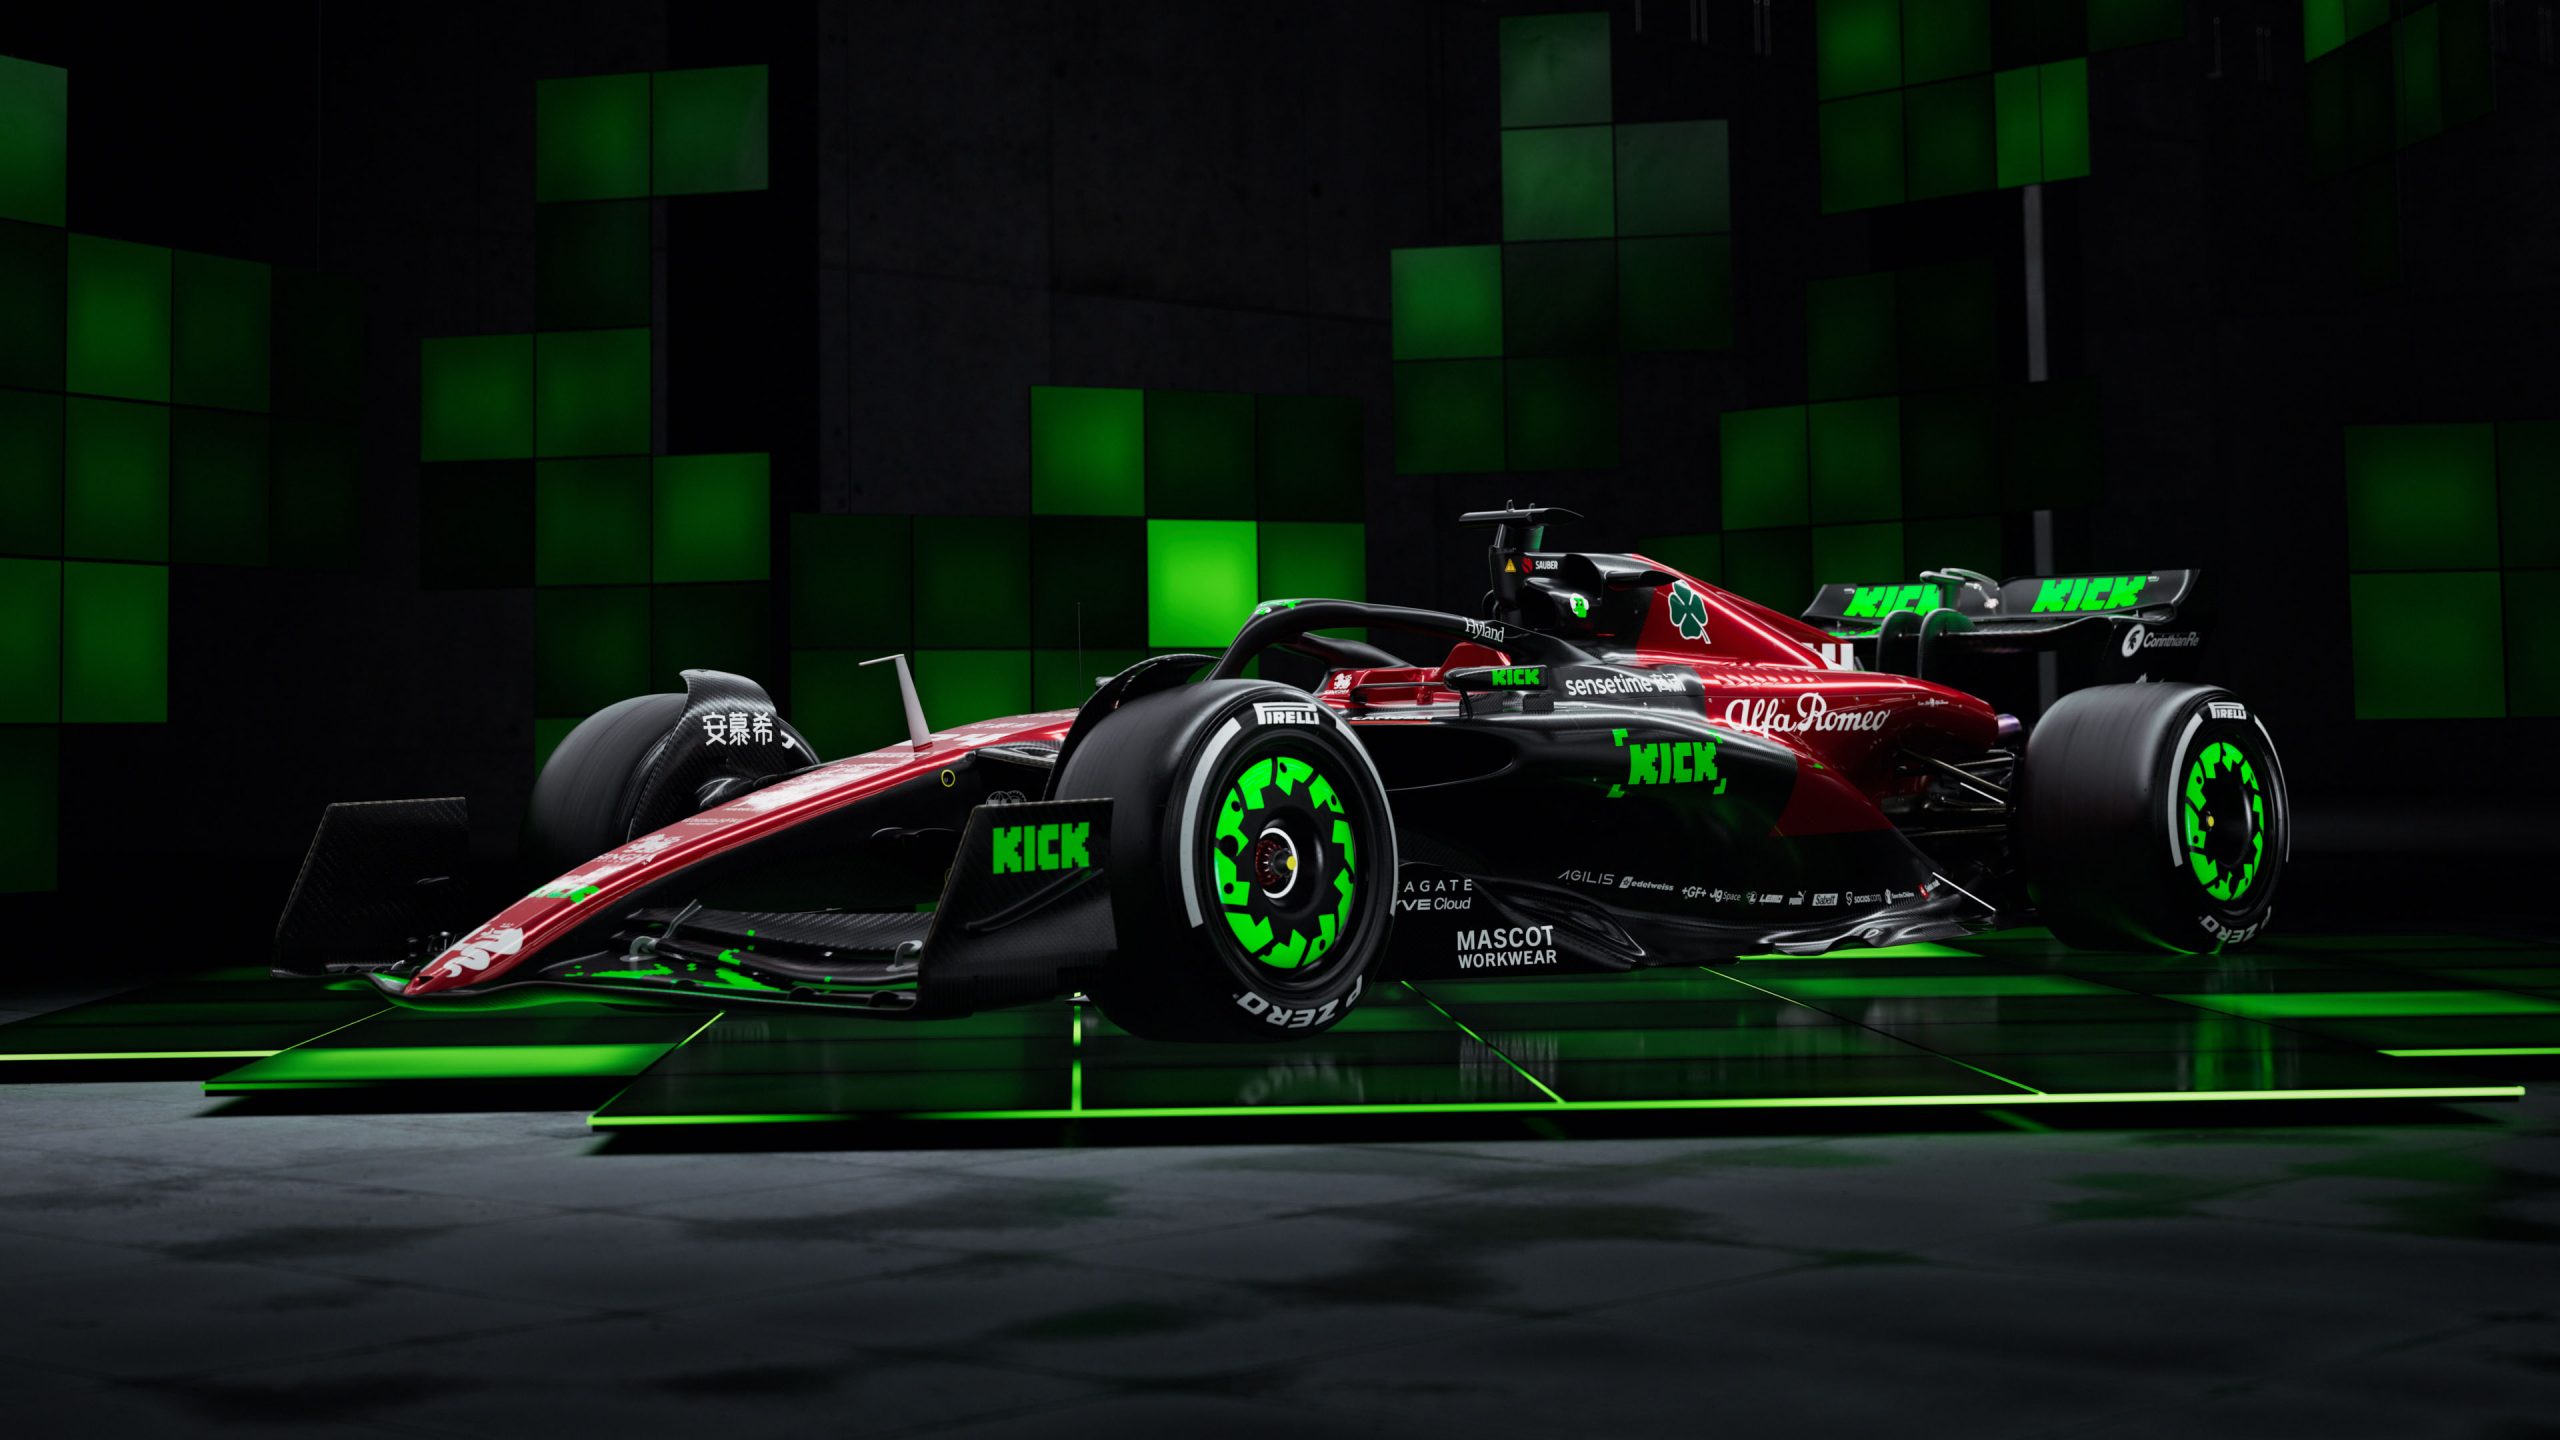 Alfa Romeo rolls out revised C43 livery for Belgian GP